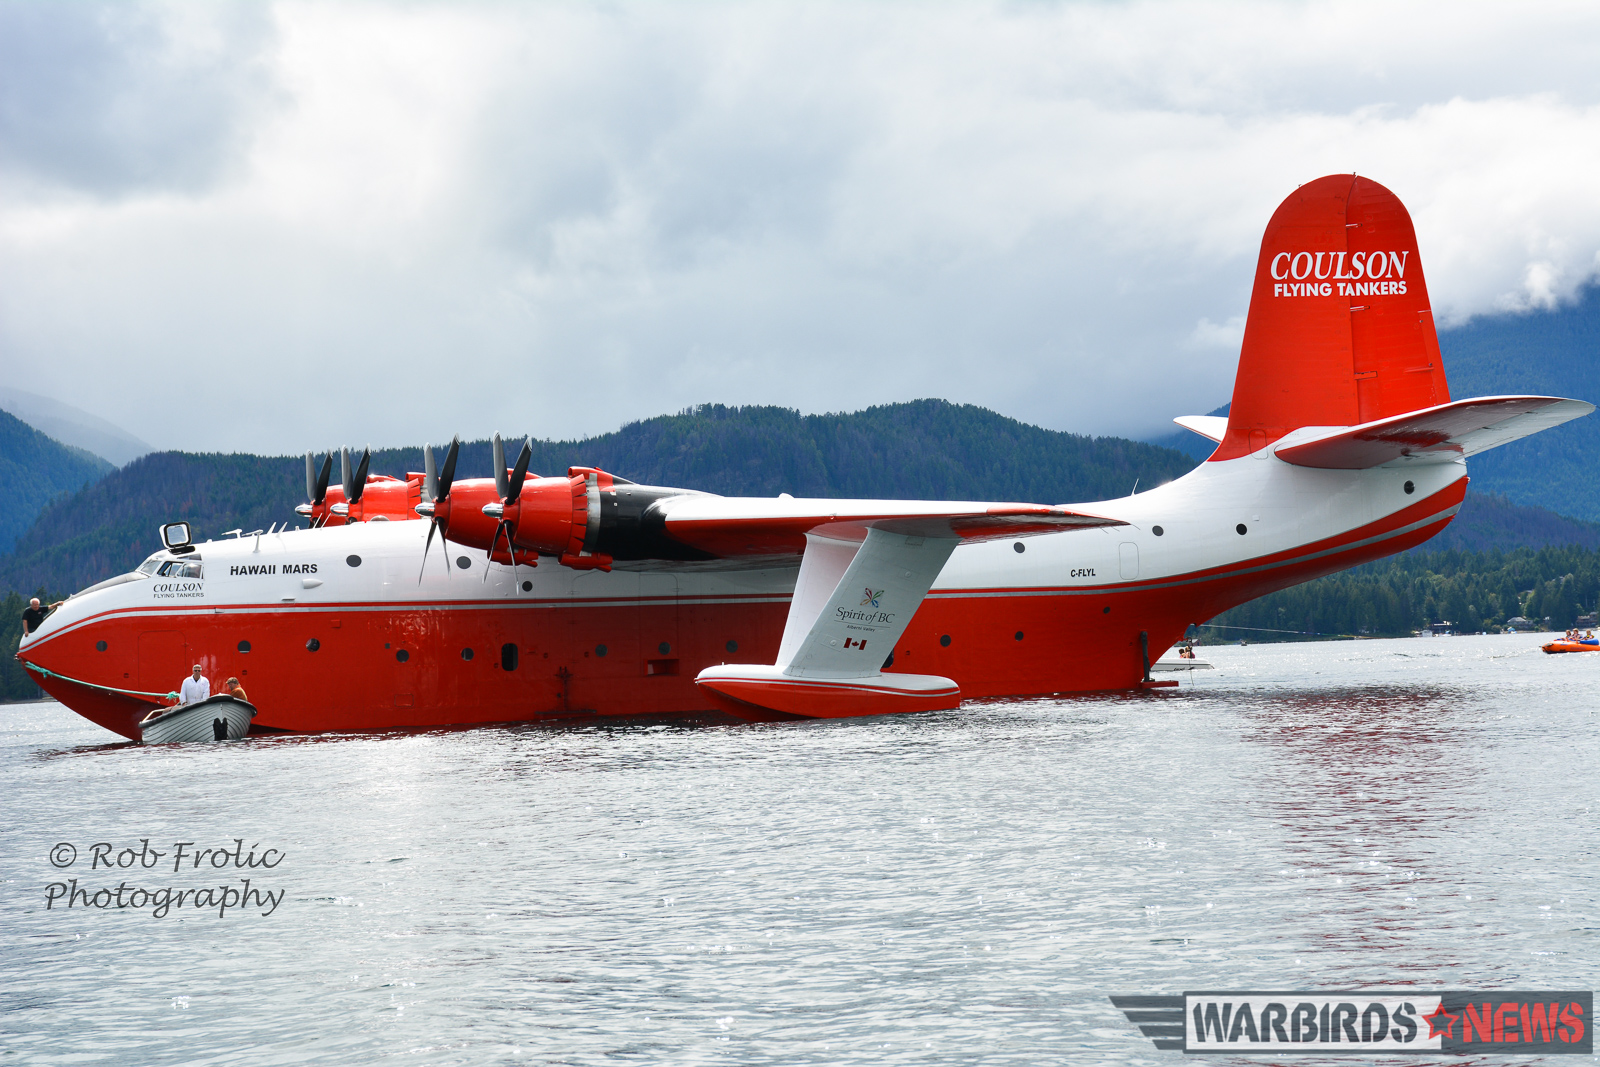 A serene giant, the Hawaii Mars floats on Sproat Lake. The proud aerial fire-fighter is possibly nearing the end of her flying days, but she still has great potential for further operations. (photo by Rob Frolic)